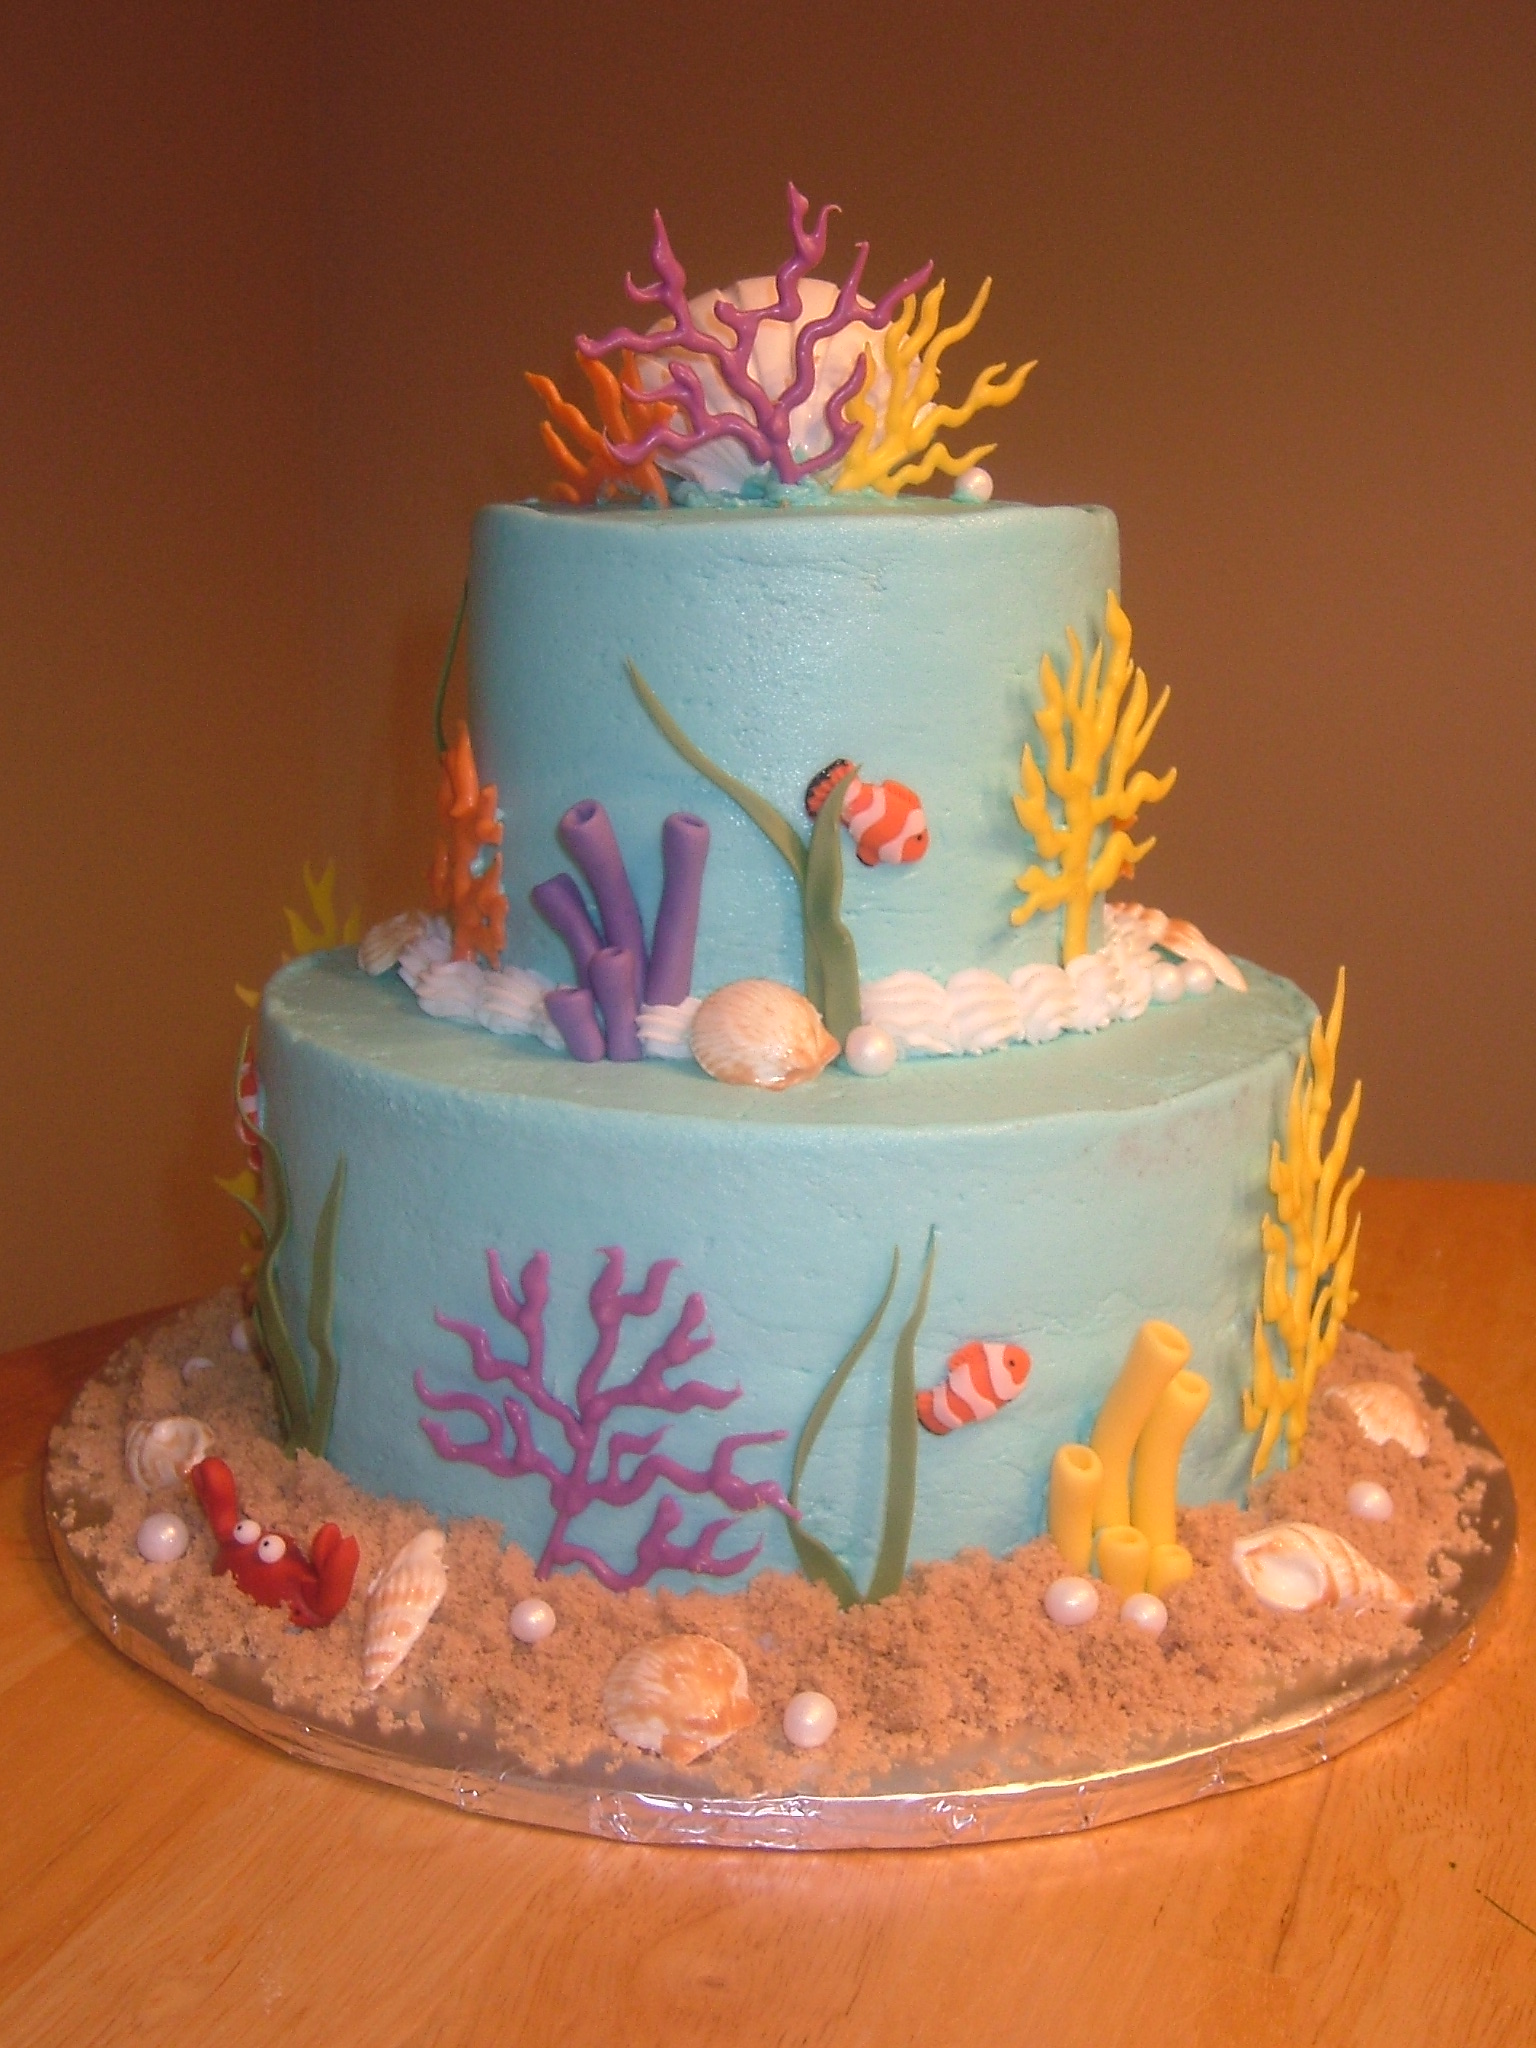 Under the Sea Themed Baby Shower Cake